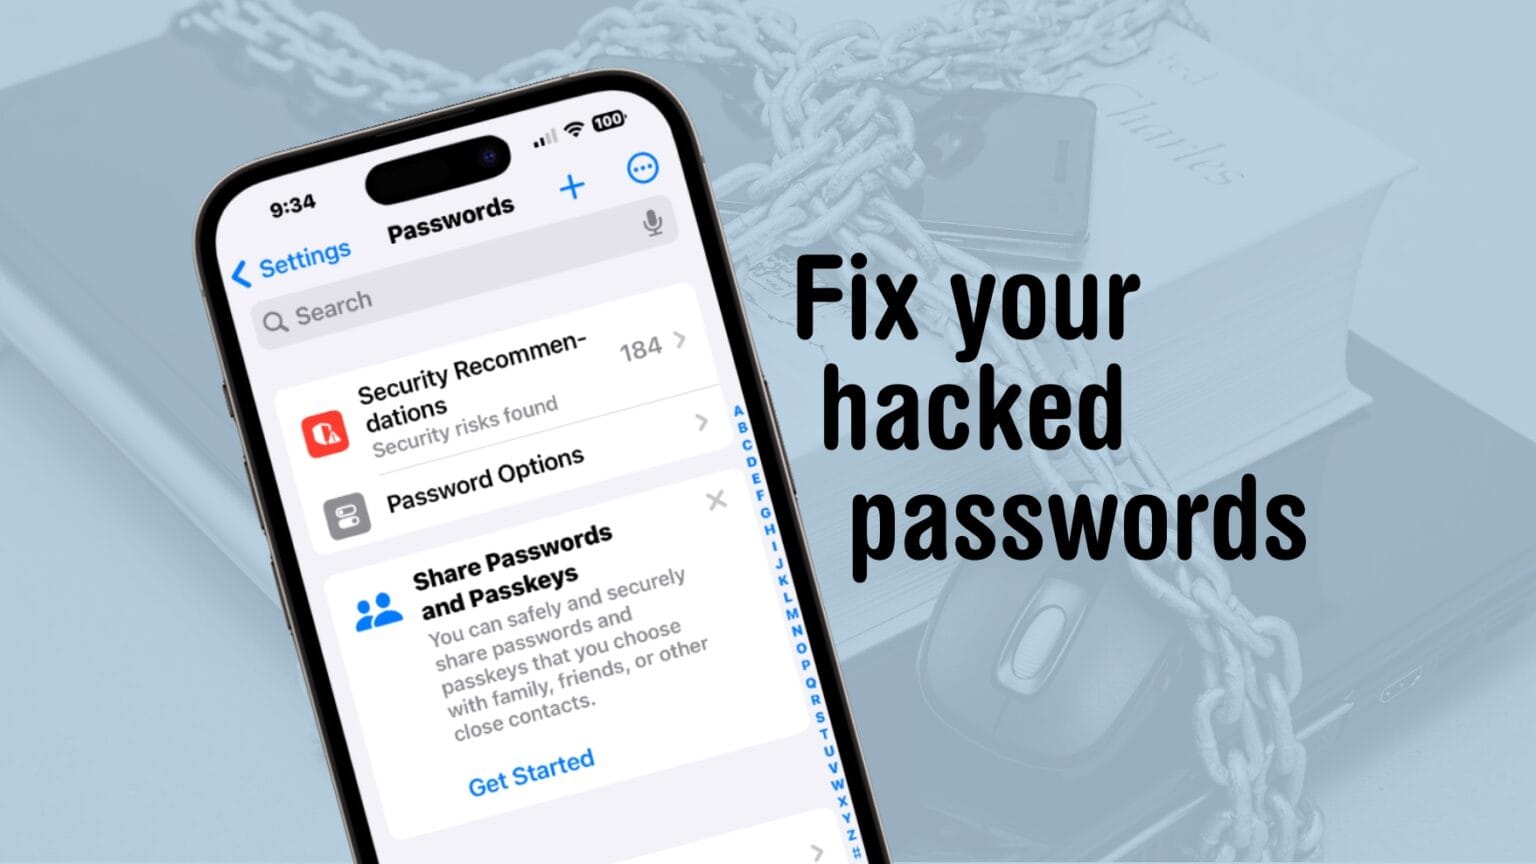 Use your iPhone to find and fix website passwords that hackers have stolen